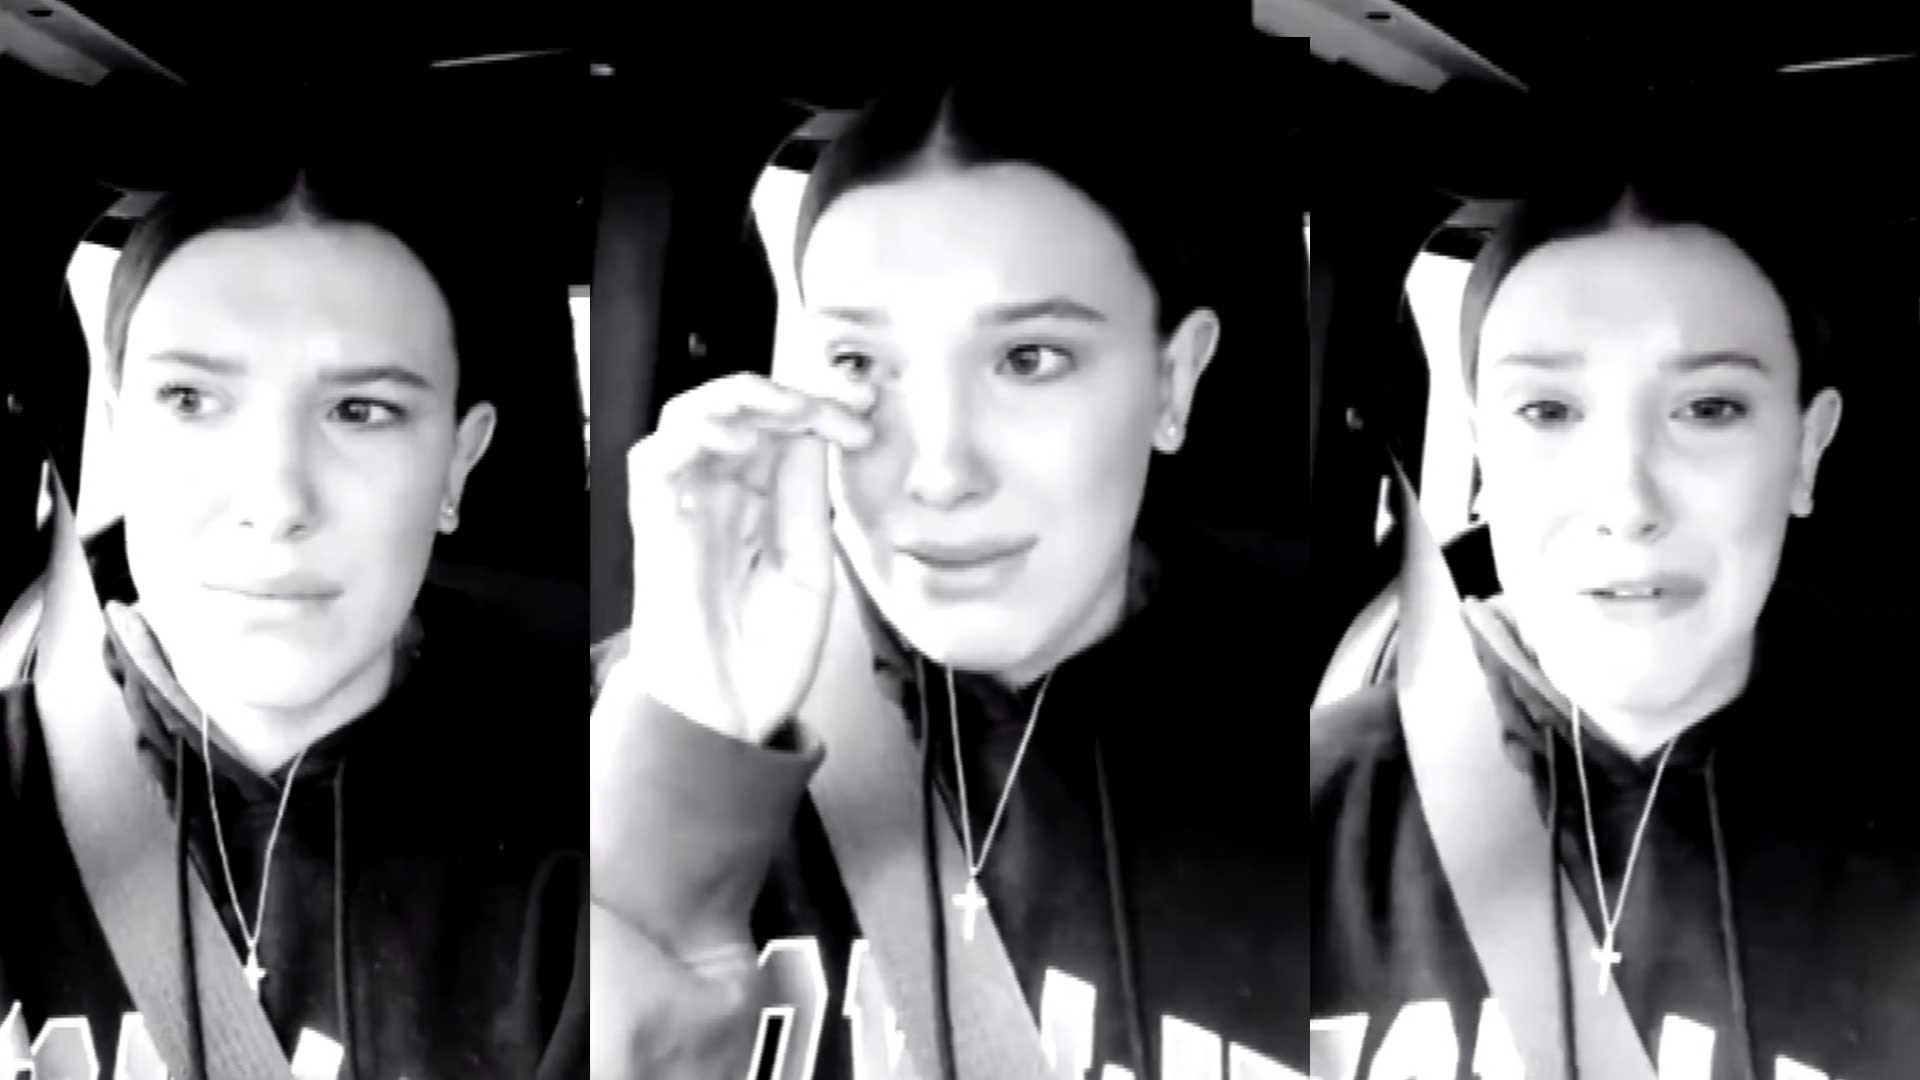 Millie Bobby Brown reveals the 'gross' change she's seen since turning 18